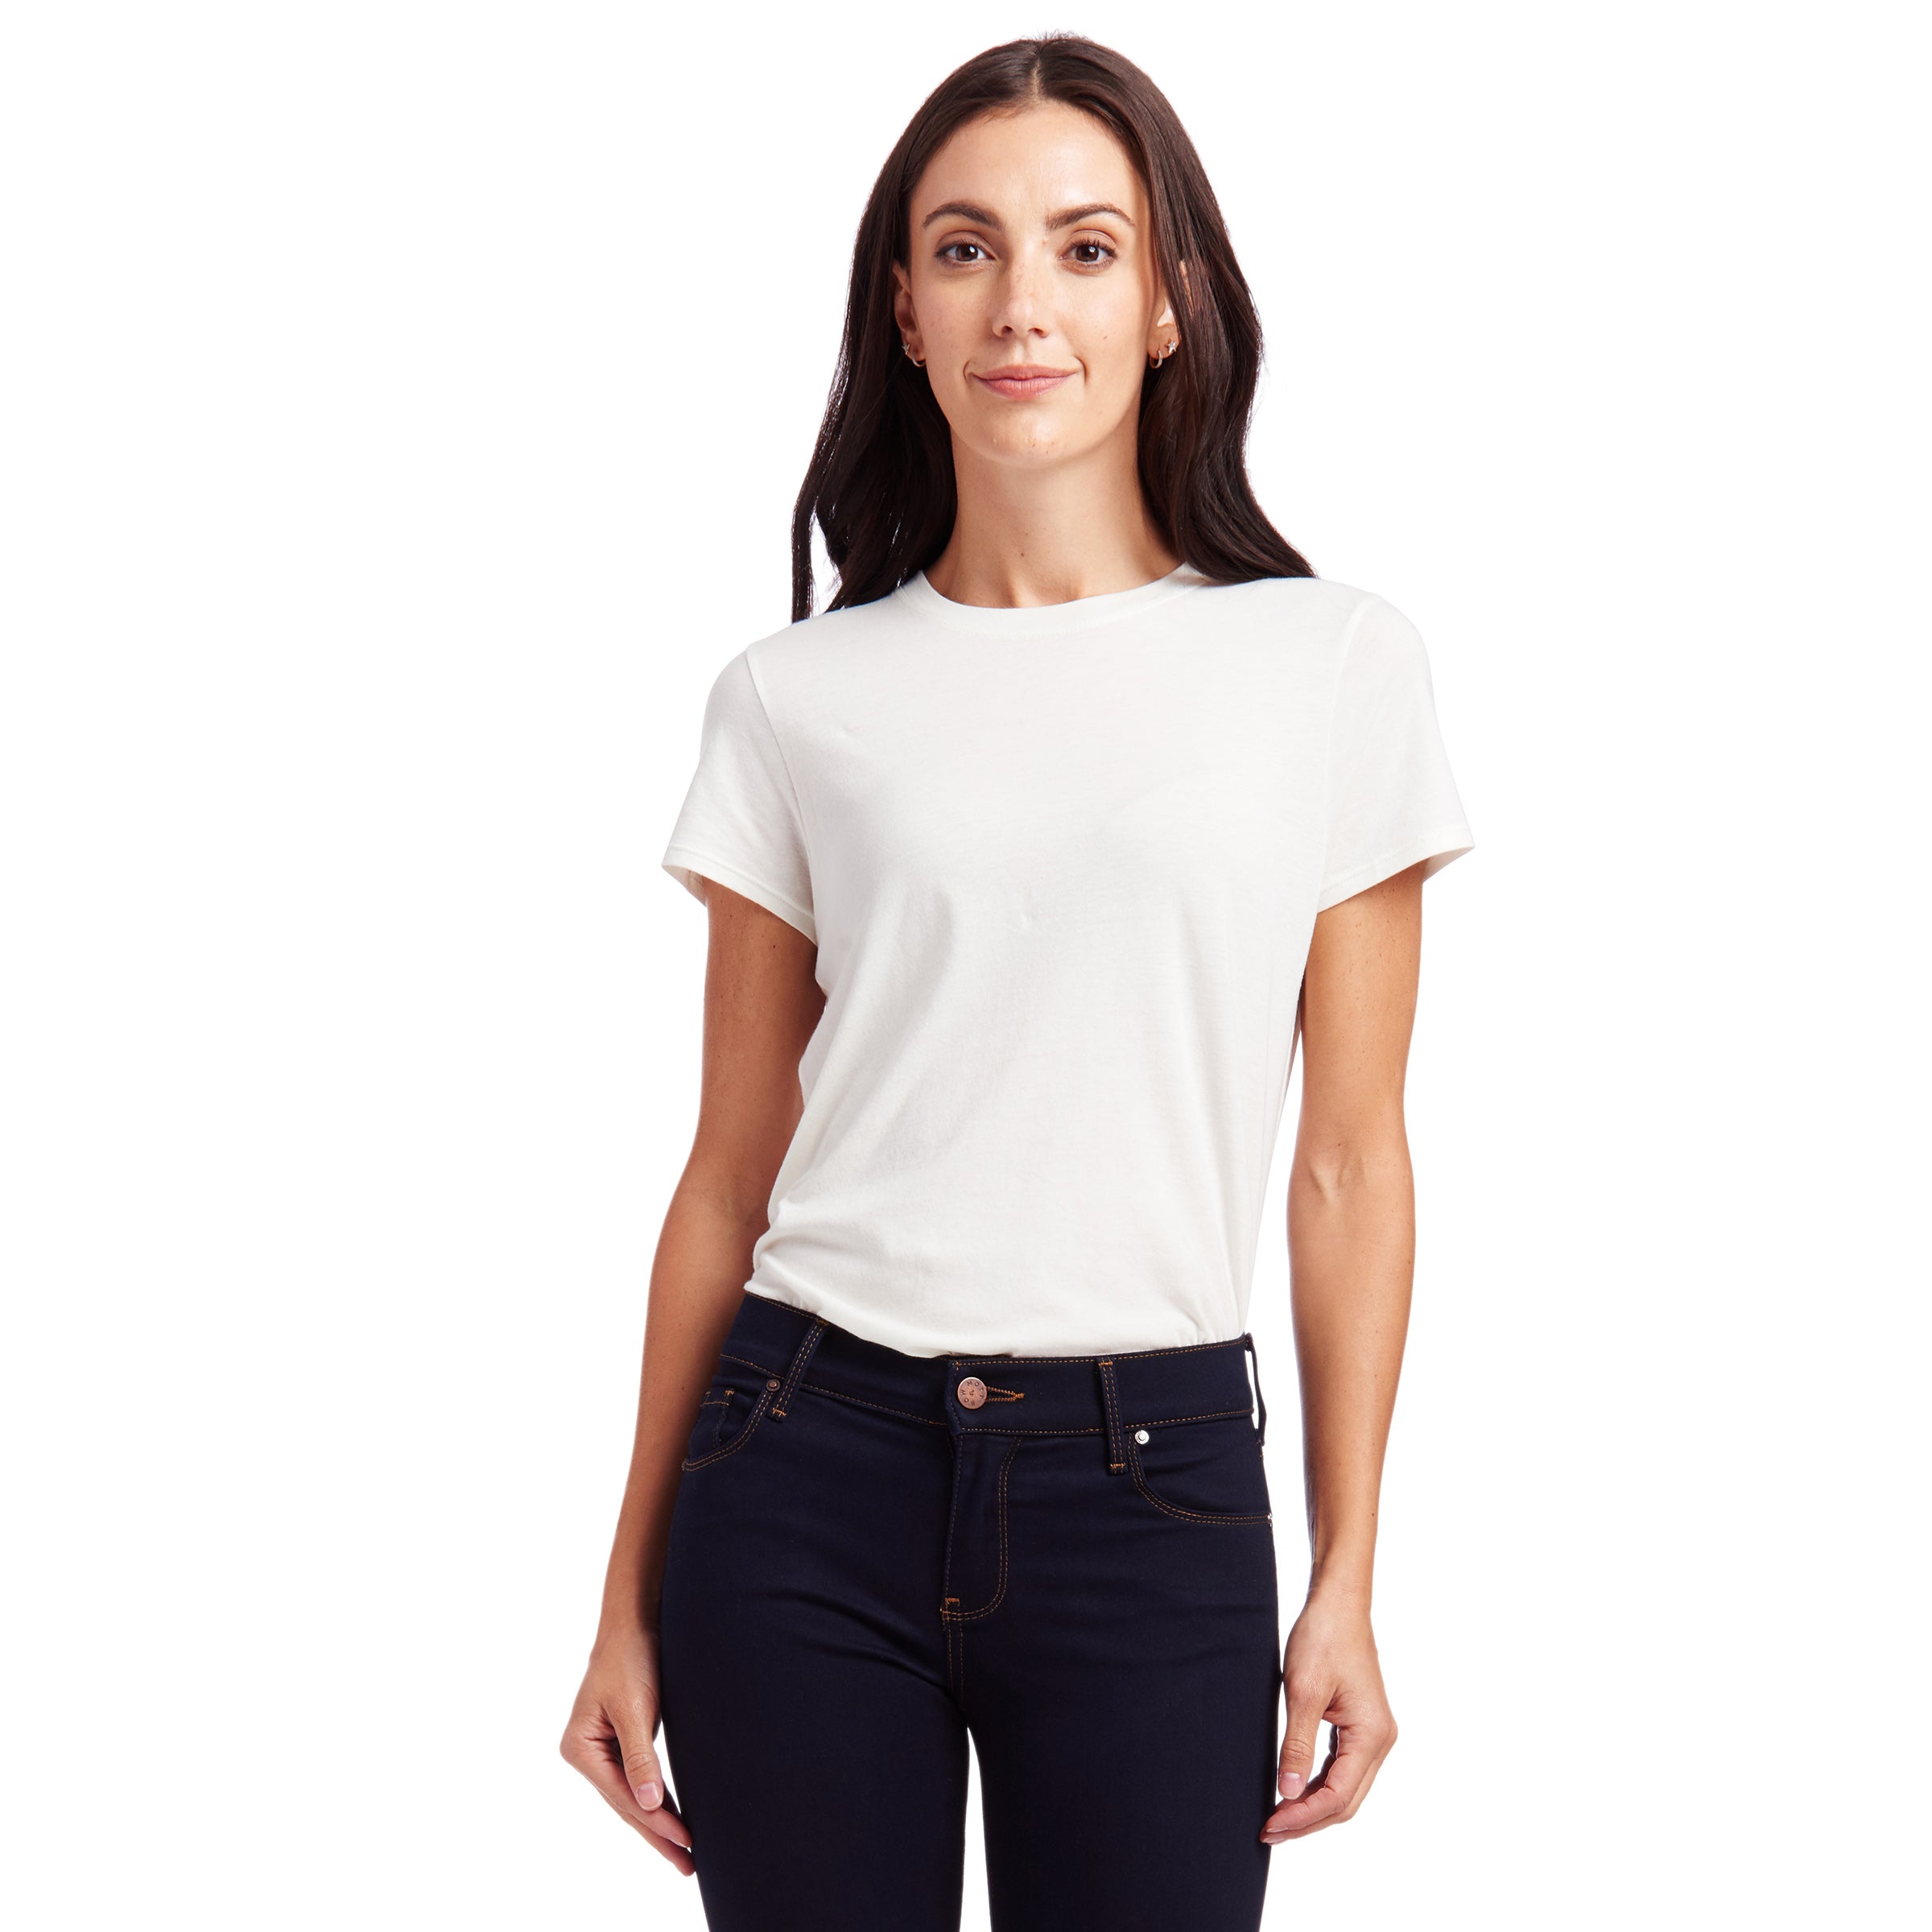 Women wearing Blanco vintage Fitted Crew Marcy Tee